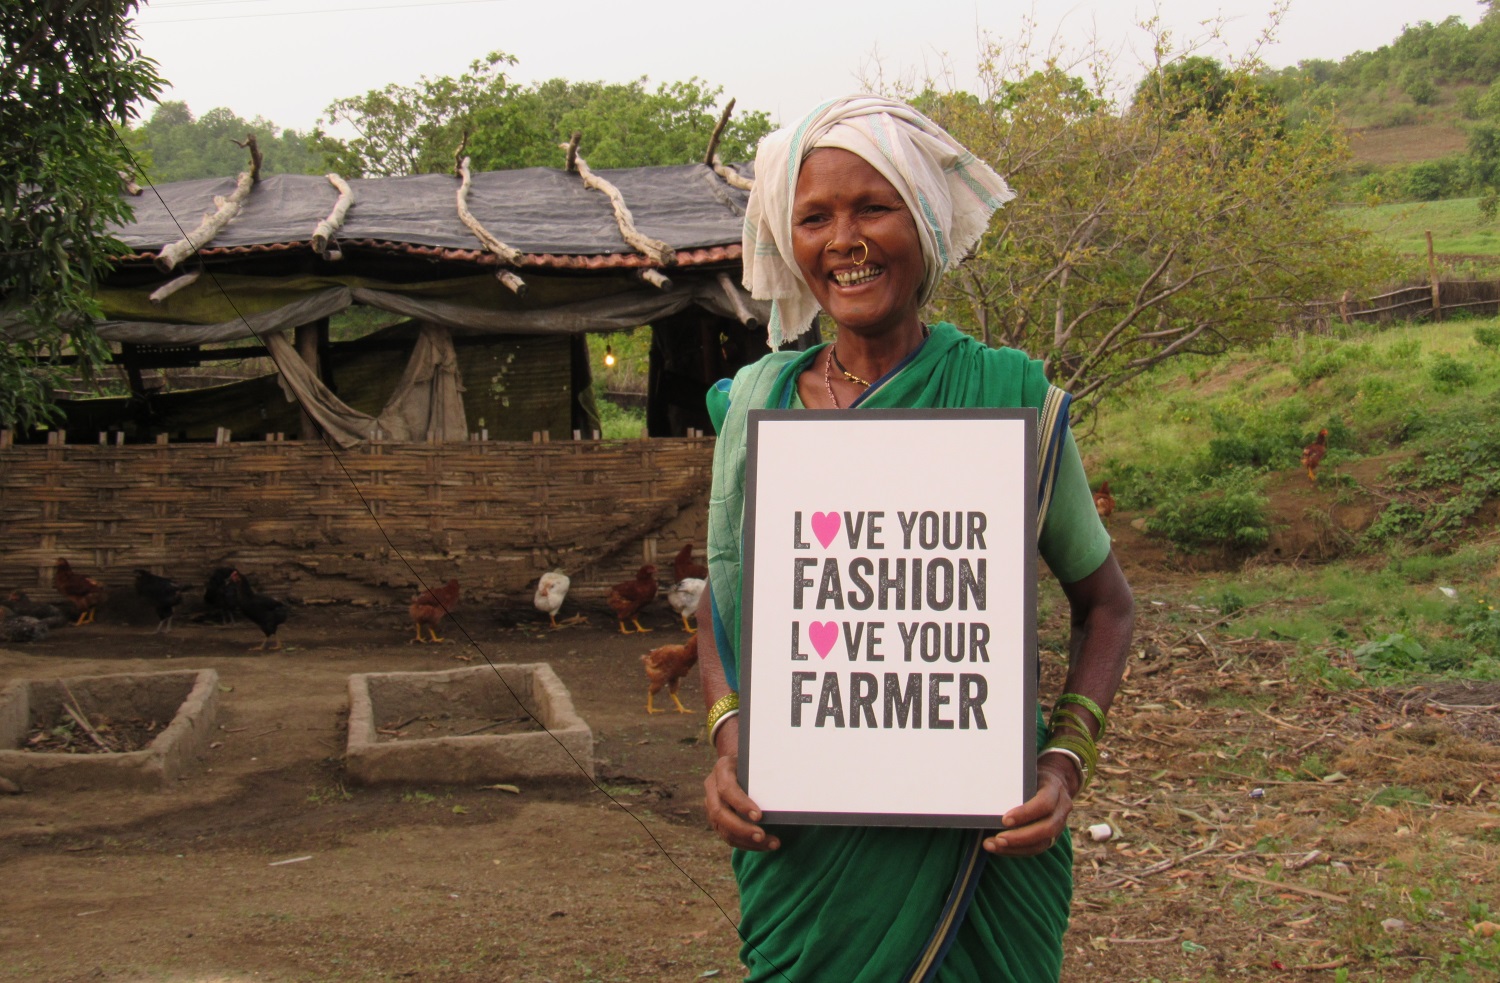 Lingu Bai, a Fairtrade cotton farmer with Chetna Organic in the Adilabad District, India, holding a sign that says, "Love your fashion, love your farmer"